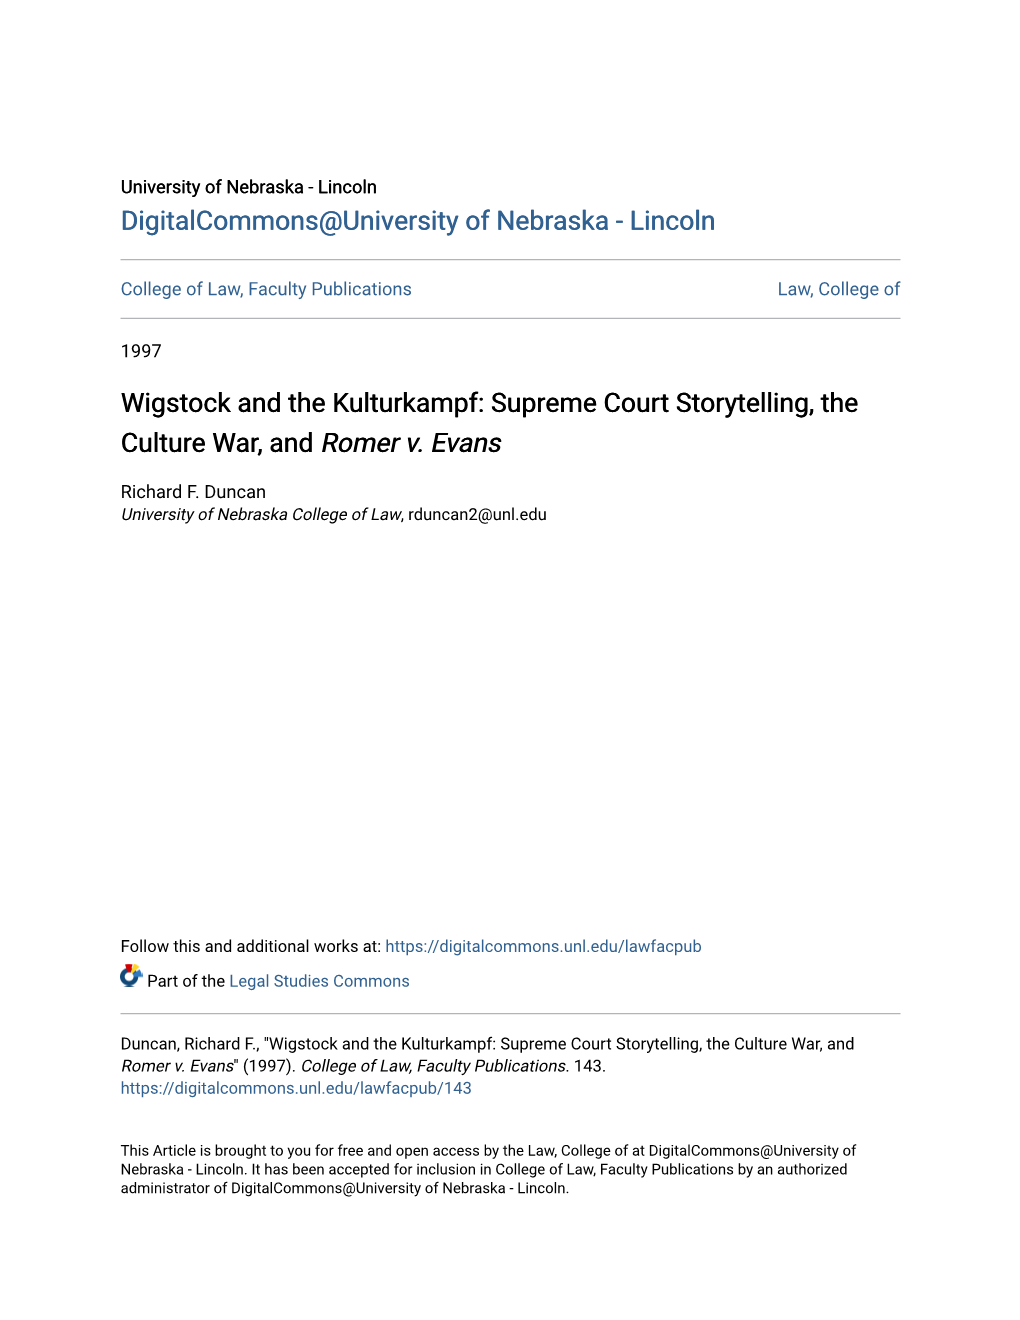 Wigstock and the Kulturkampf: Supreme Court Storytelling, the Culture War, and Romer V